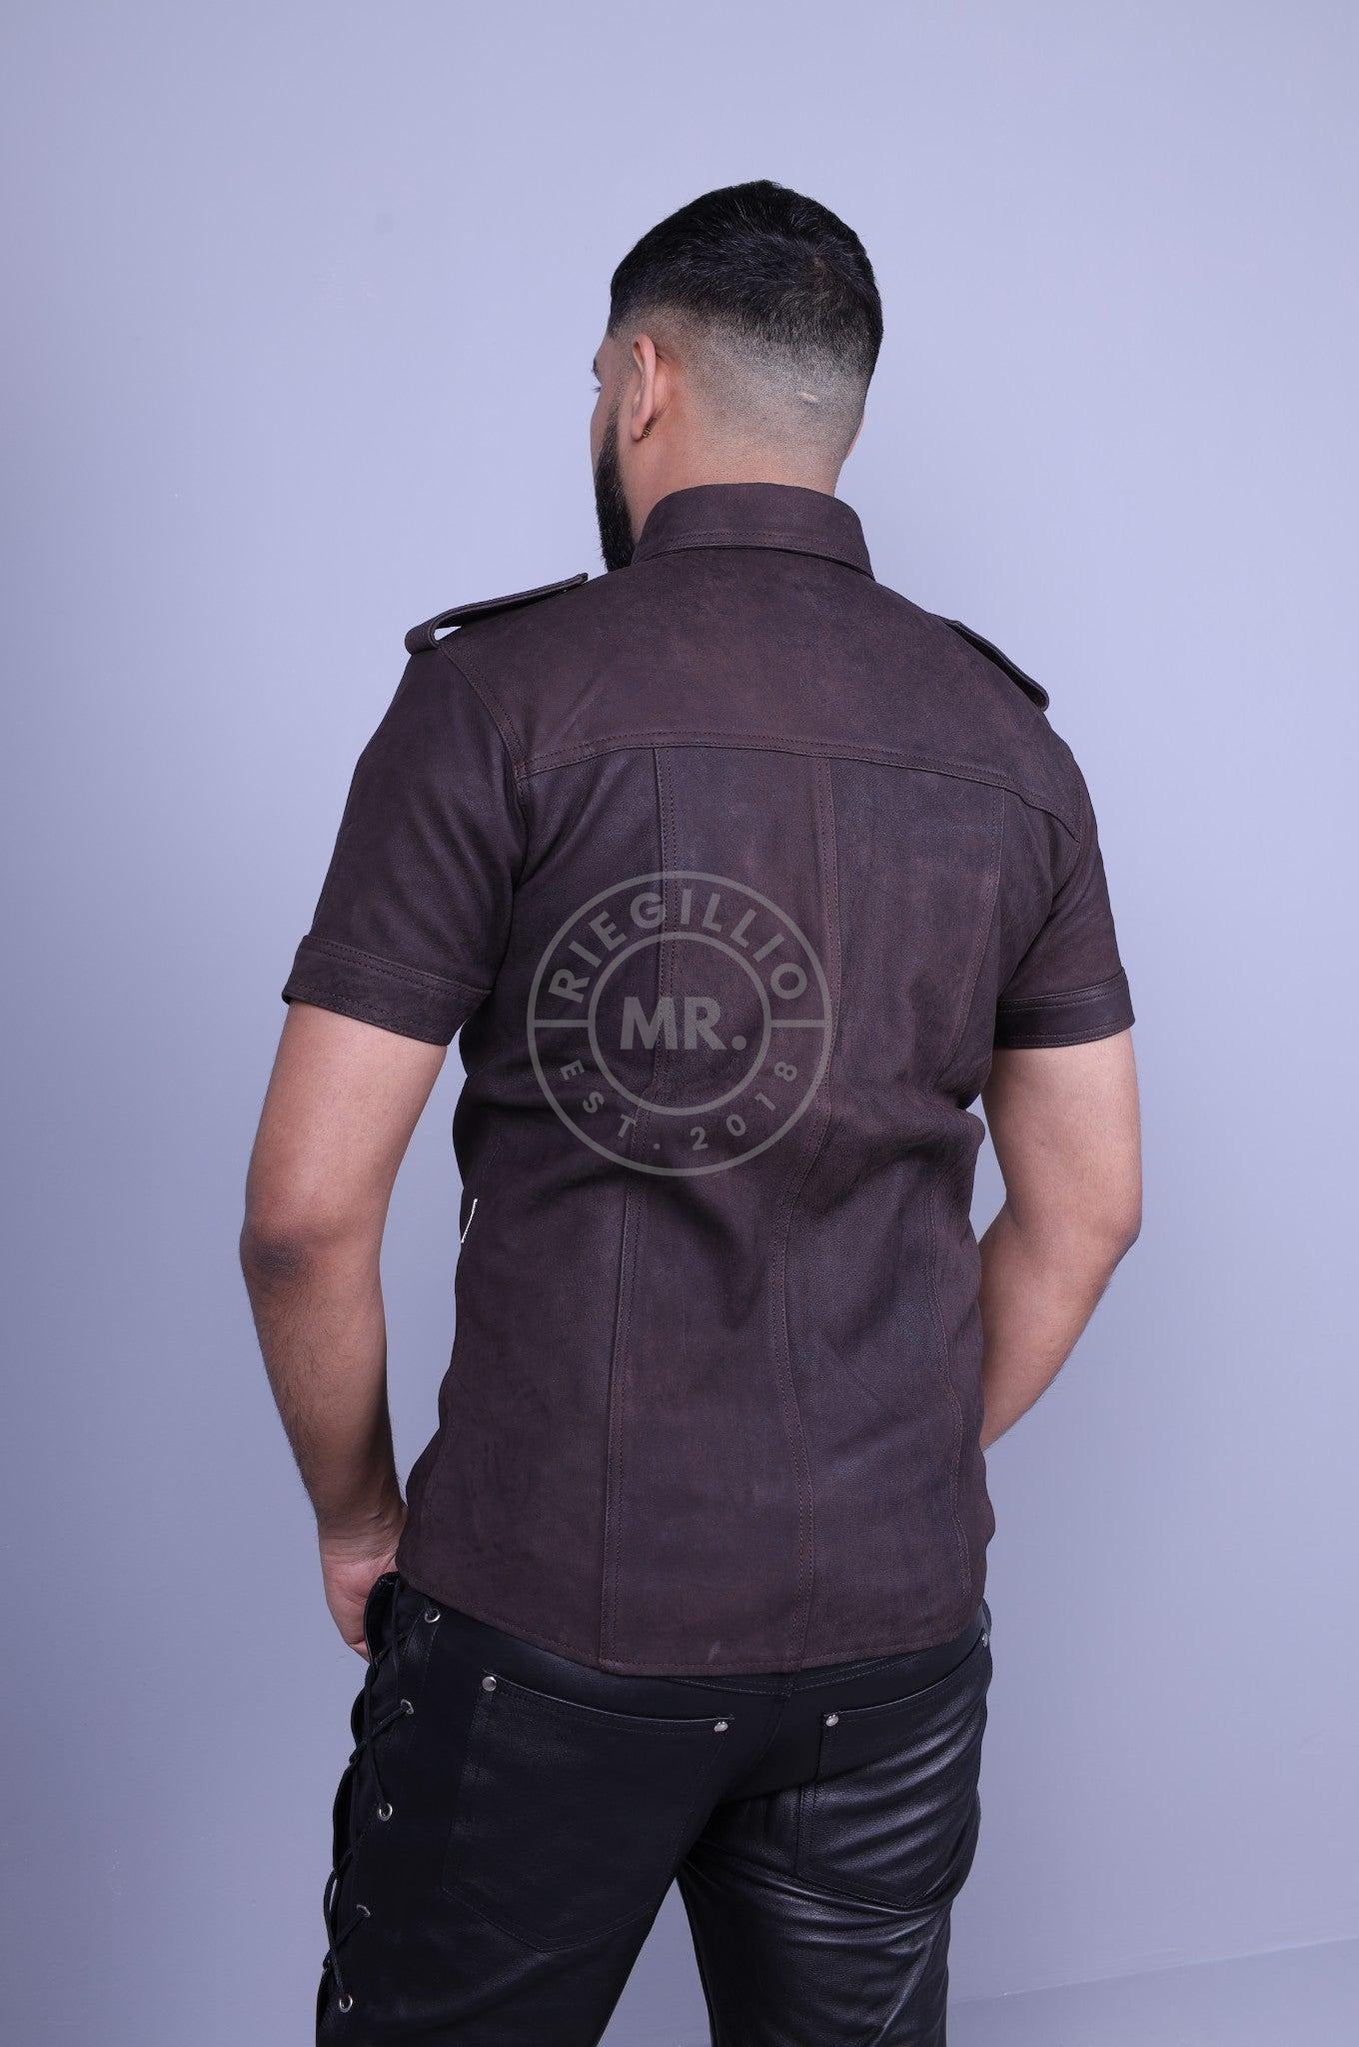 Washed Brown Leather Shirt at MR. Riegillio